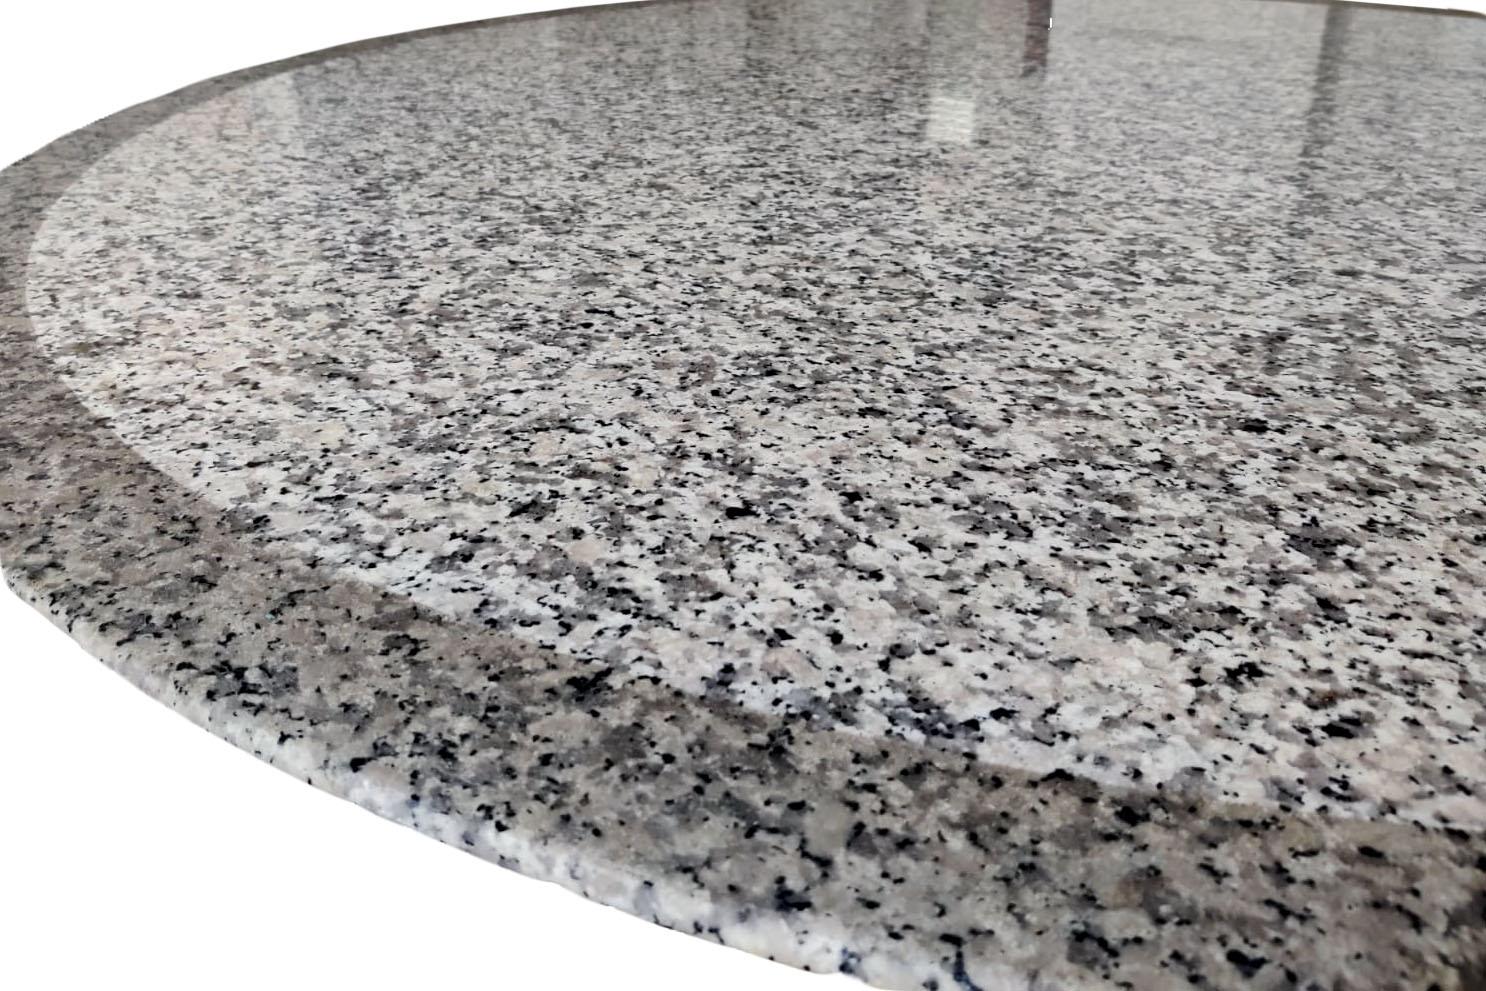 Round table in grey, black and white granite standing on a metallic grey lacquered wood base with three rectangular legs.

Work realized by an architect in the 1970s.